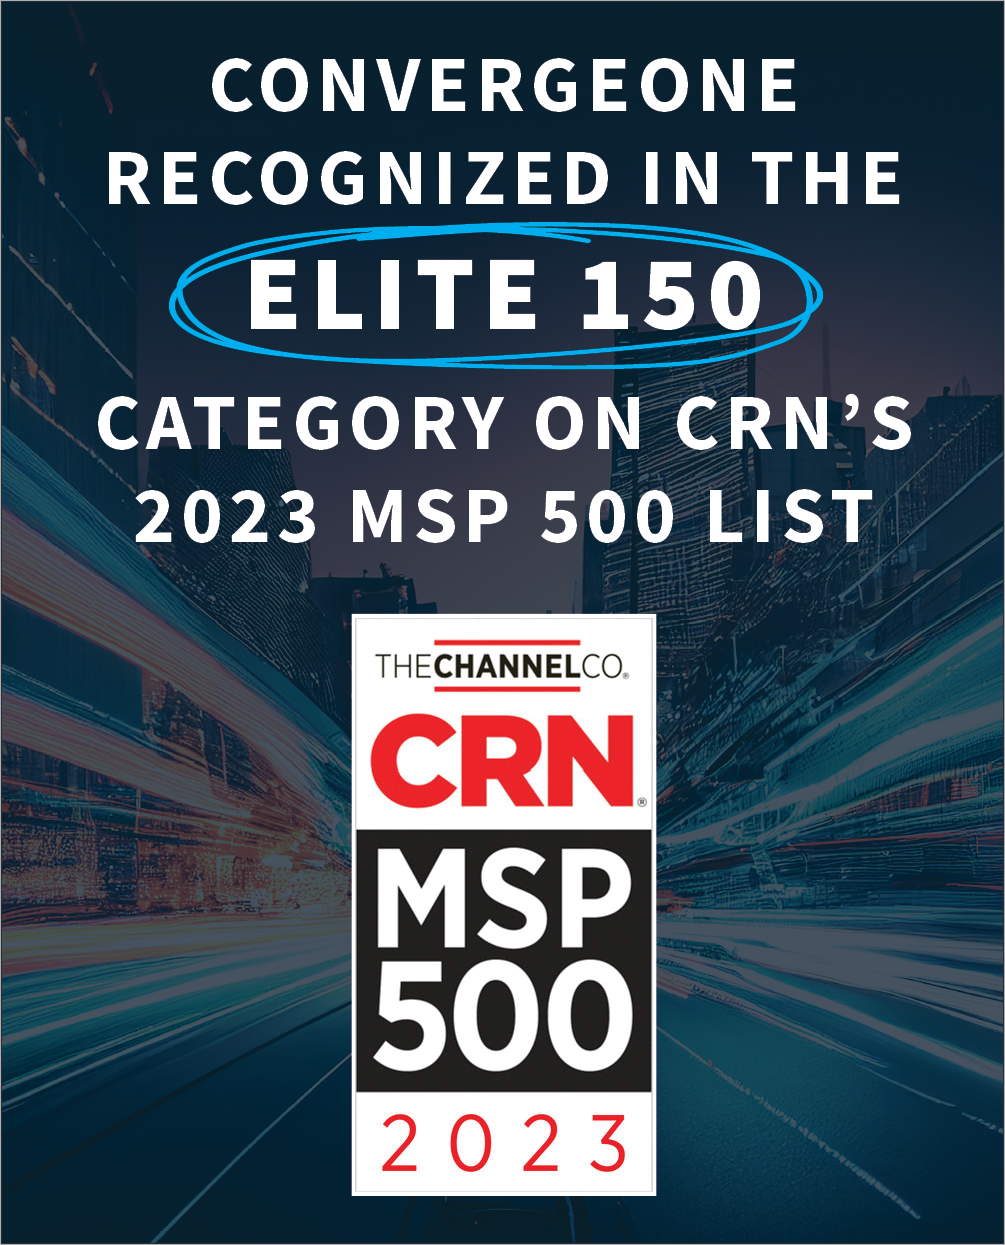 ConvergeOne Recognized in the Elite 150 Category on CRN's 2023 MSP 500 List